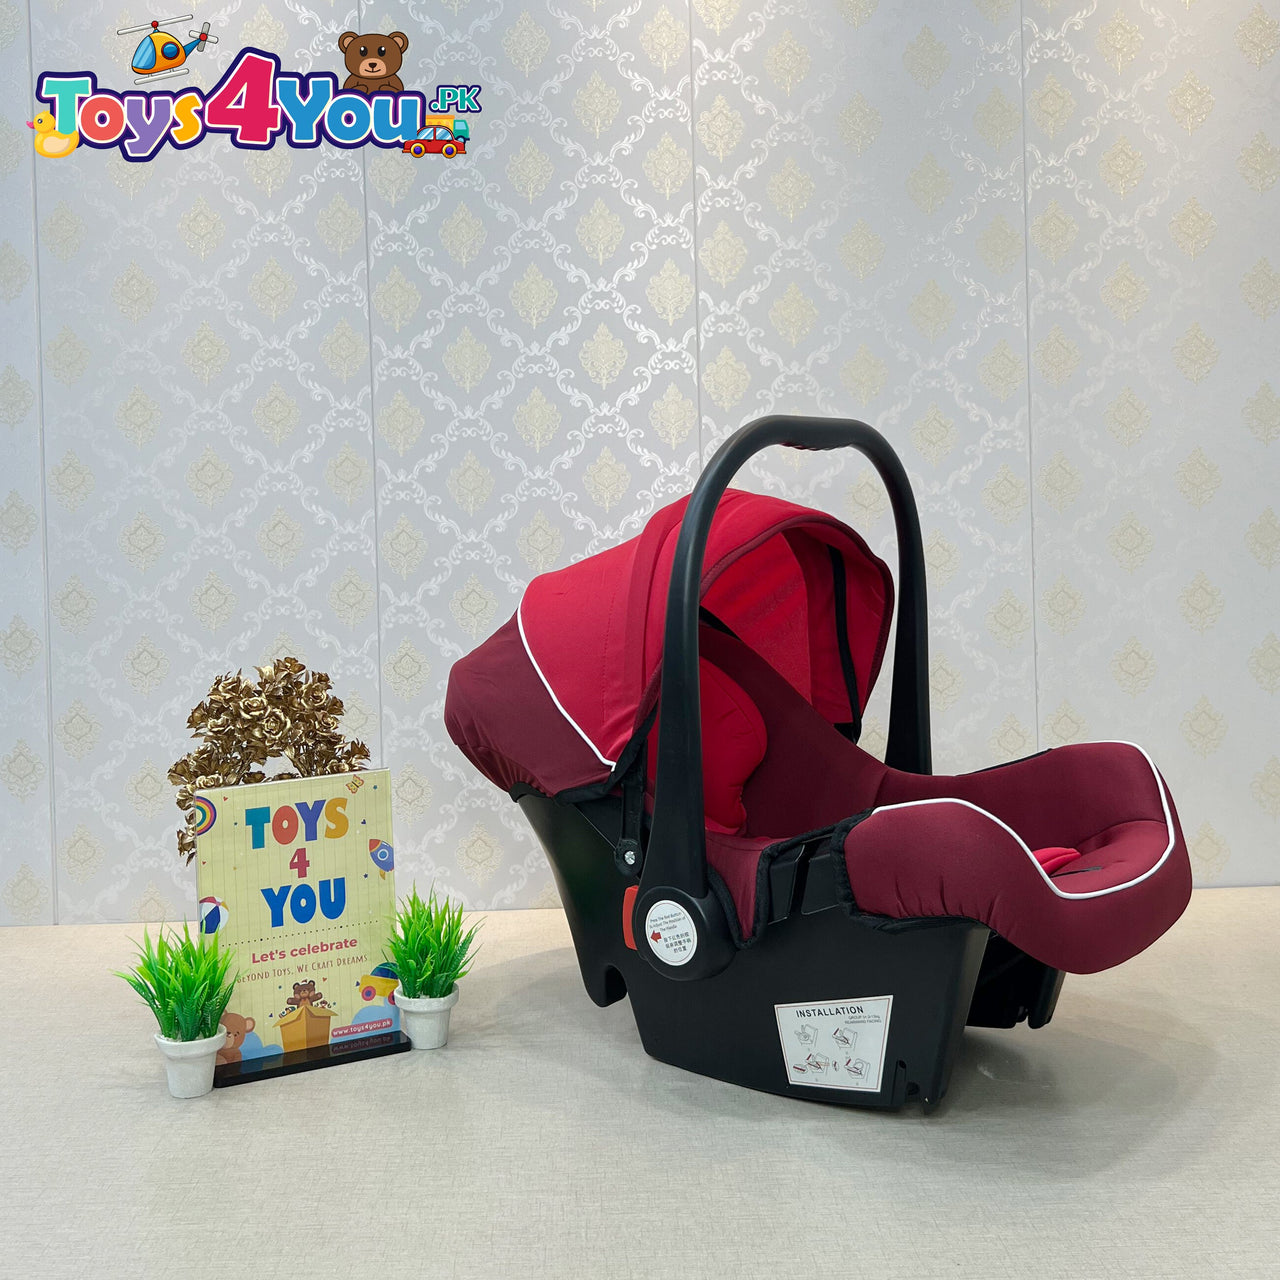 2 IN 1 BABY CARRY COT & CAR SEAT WITH SOFT CUSHION